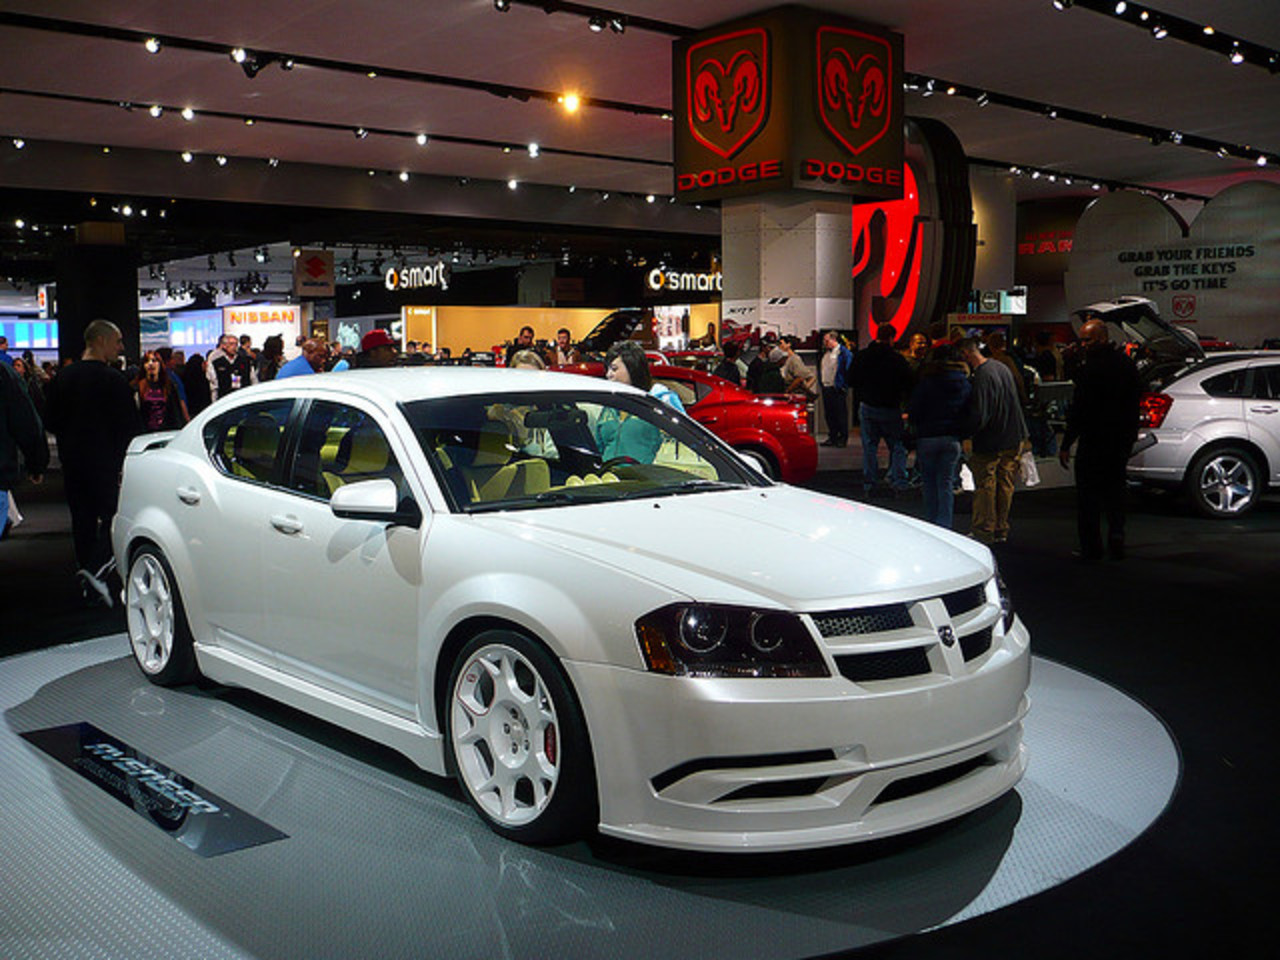 Tricked out Dodge Avenger | Flickr - Photo Sharing!